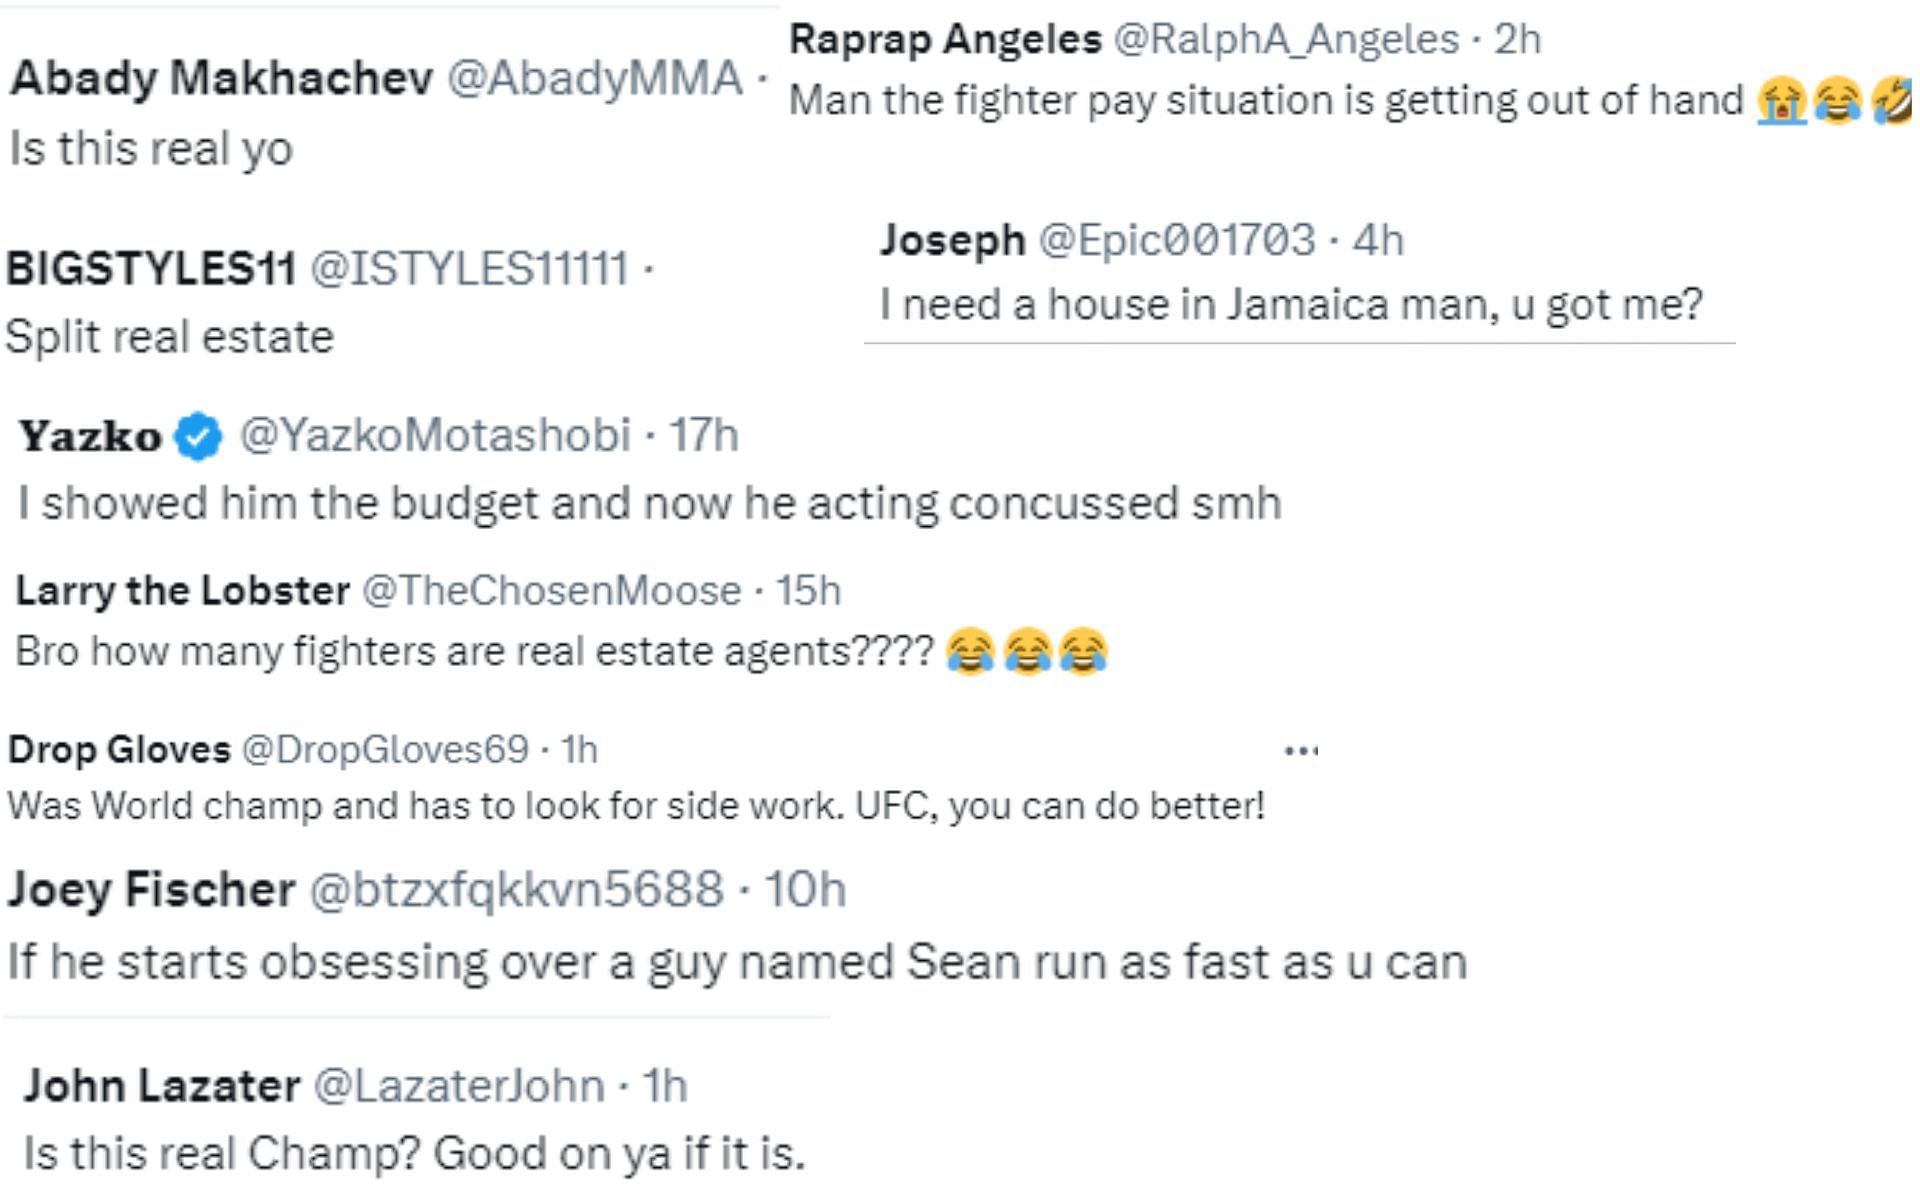 Fan reactions to Aljamain Sterling working as a real estate agent